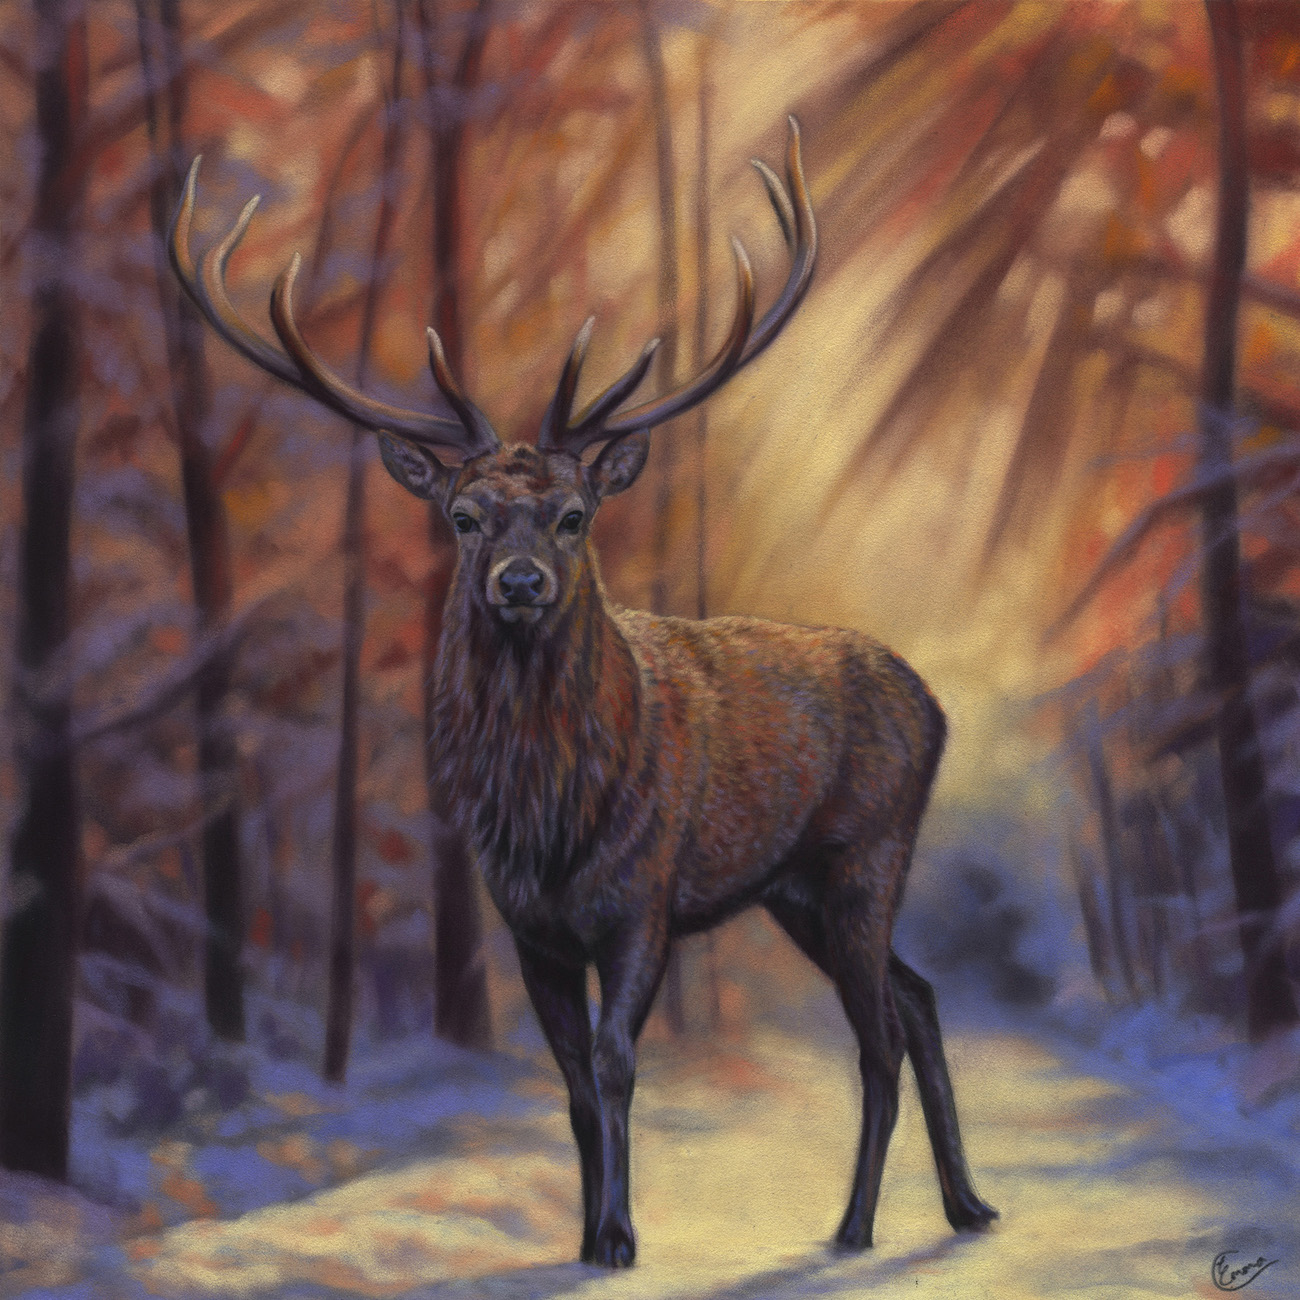 Emma Colbert, "Brave Hart," 2016, Unison pastels on Hahnemühle velour paper, 19 x 19 in. Sold. Painted as part of a series of red deer from Gosford Park in Northern Ireland.